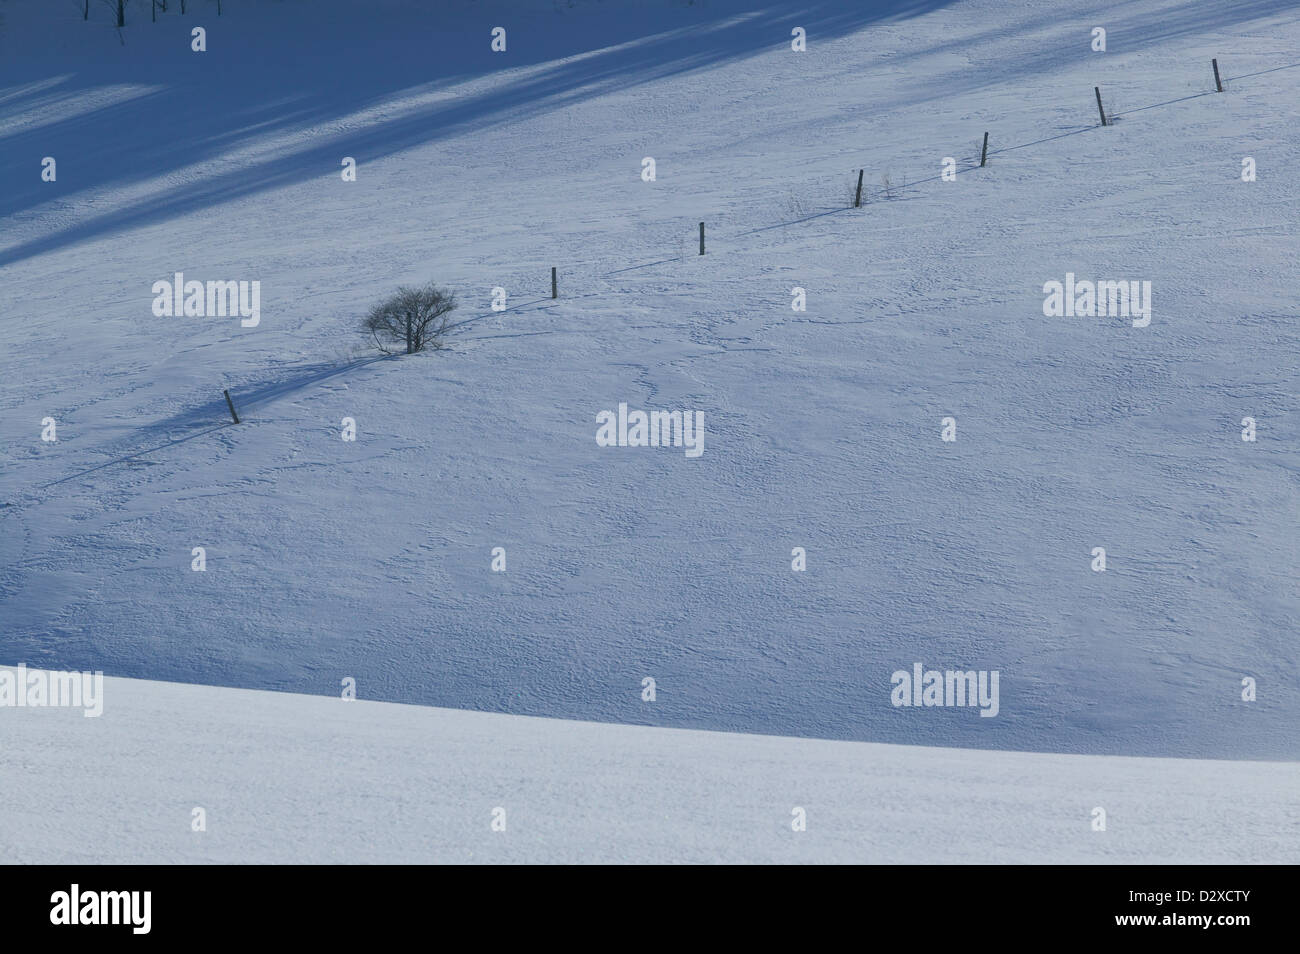 Tranquil scene of a few trees in an open field covered in snow, Stowe, Vermont, USA Stock Photo